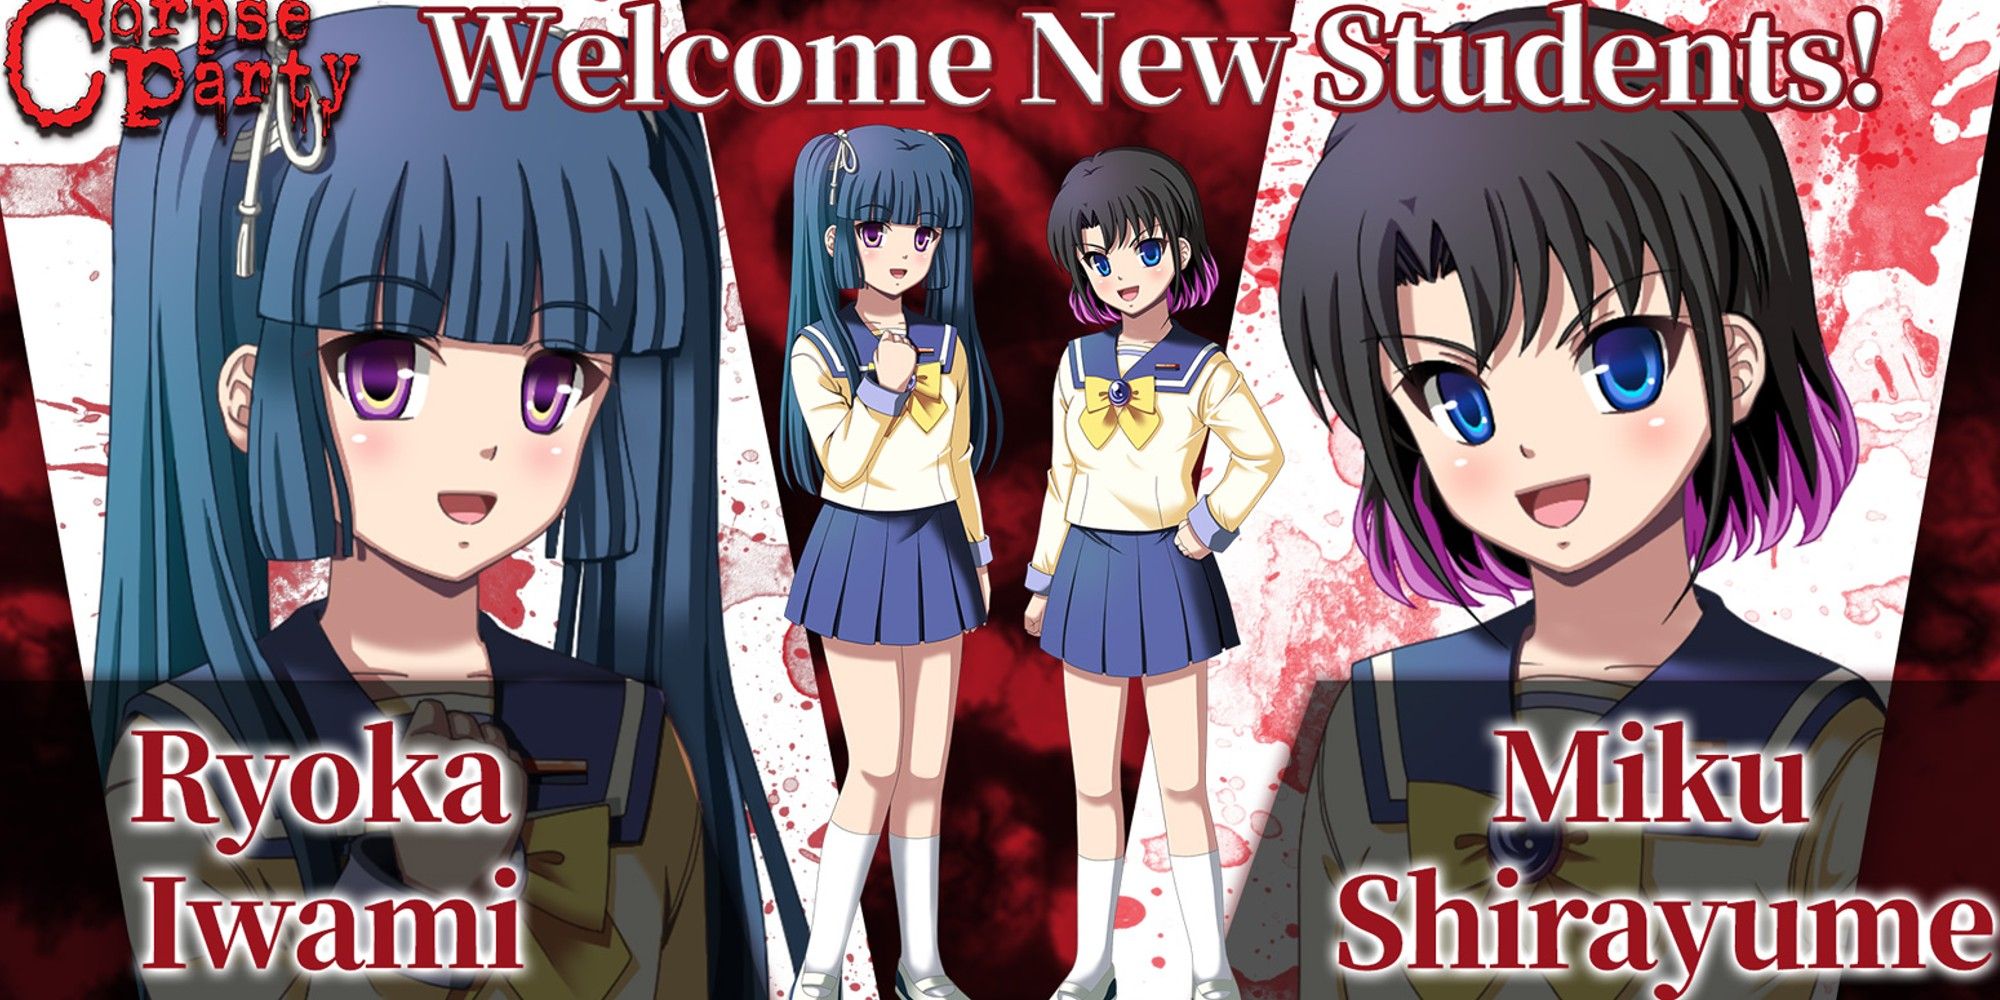 Corpse Party 2021 Introduces Two New Characters